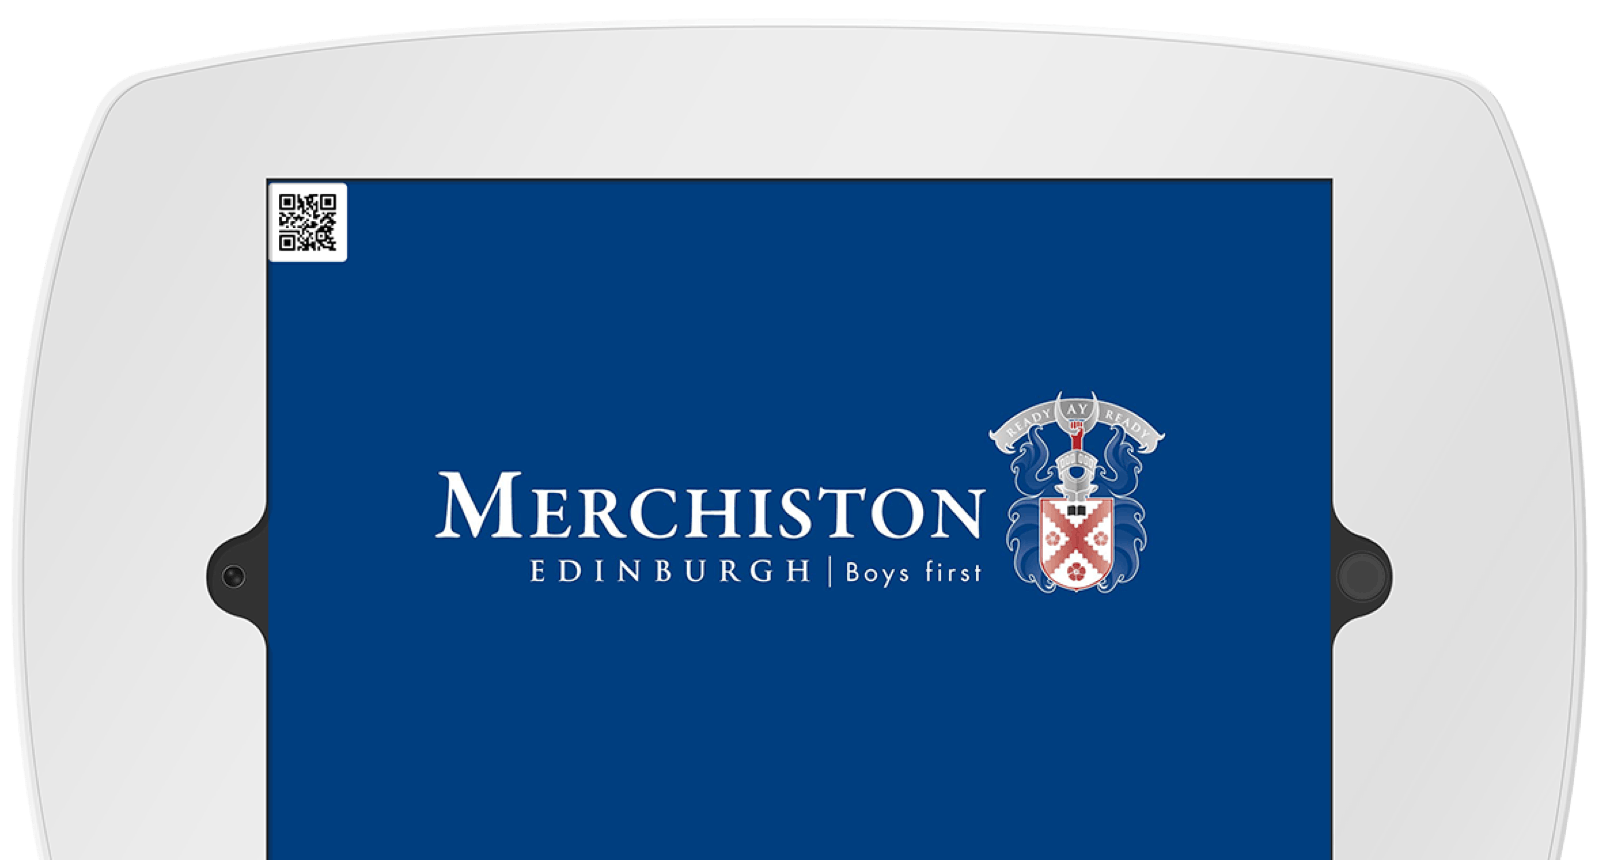 Tablet with Merchiston school logo sign in screen